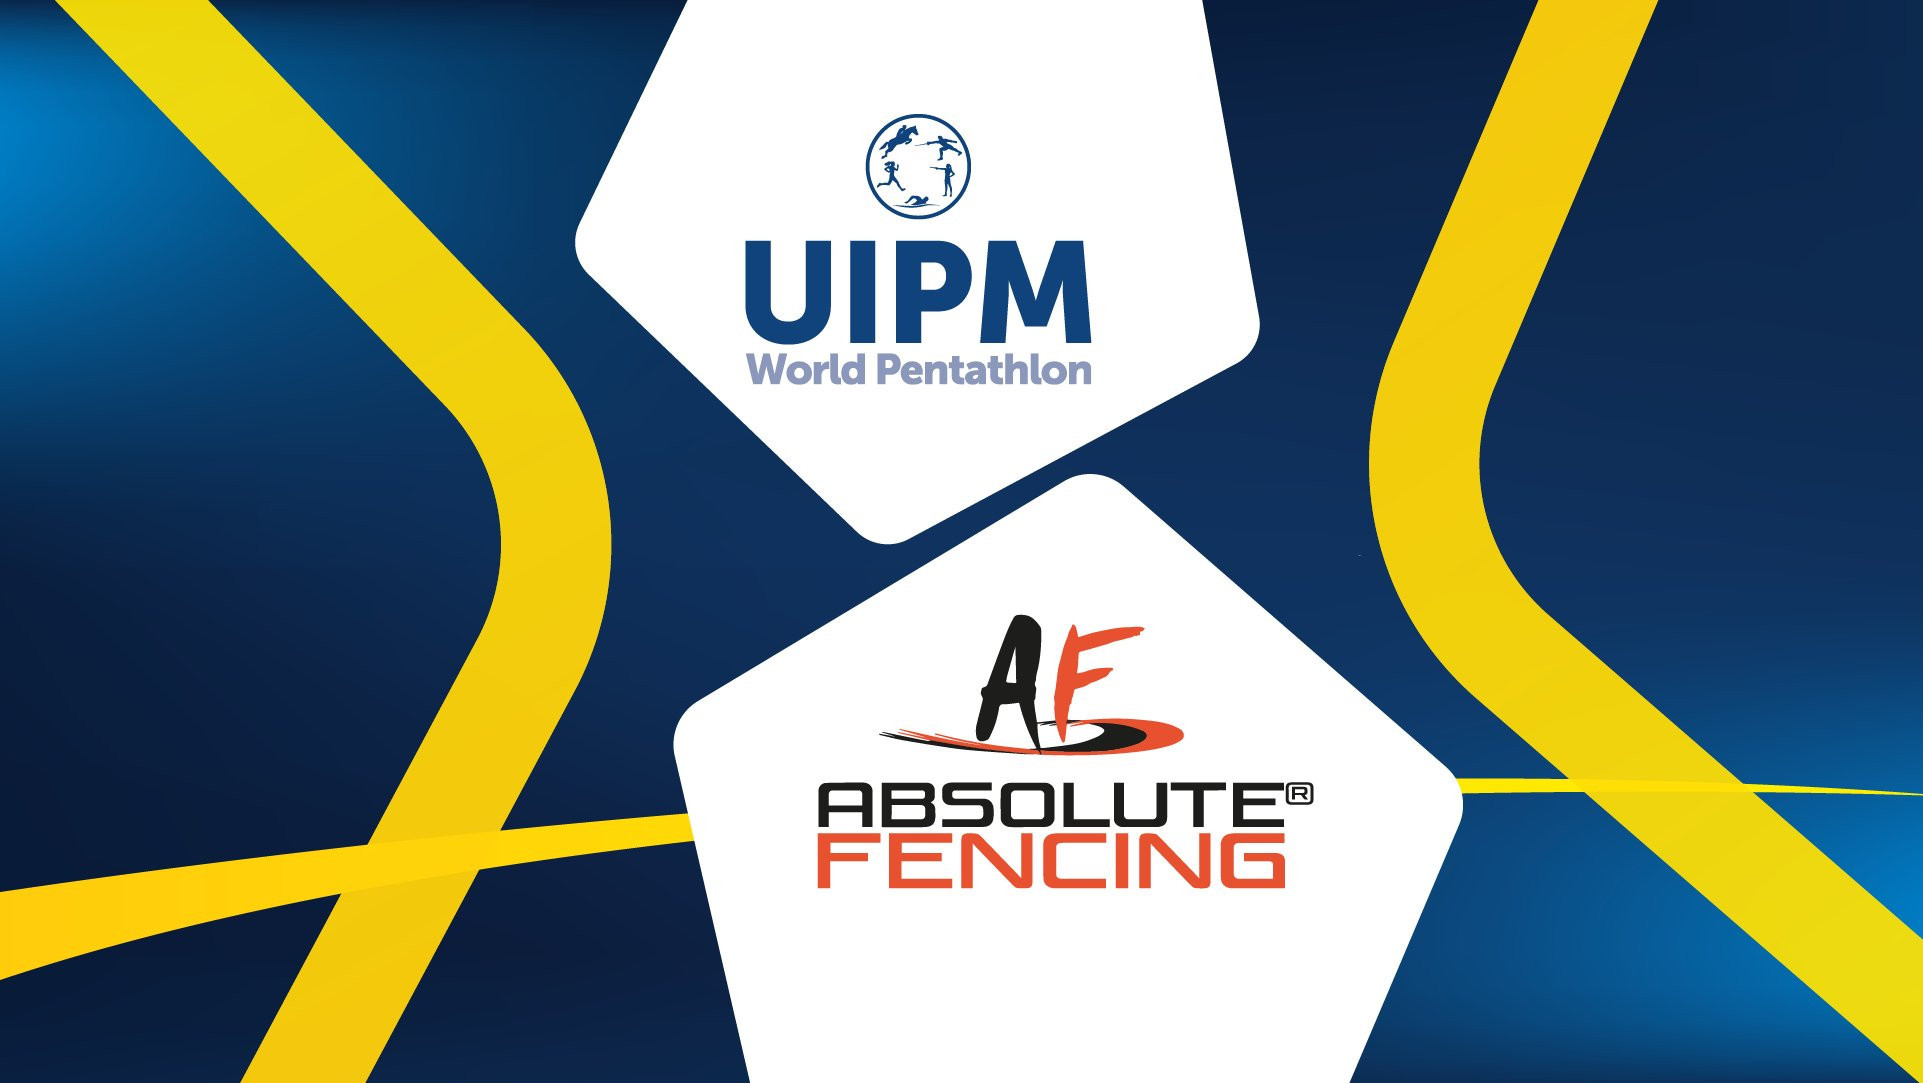 UIPM extend partnership with Absolute Fencing Gear